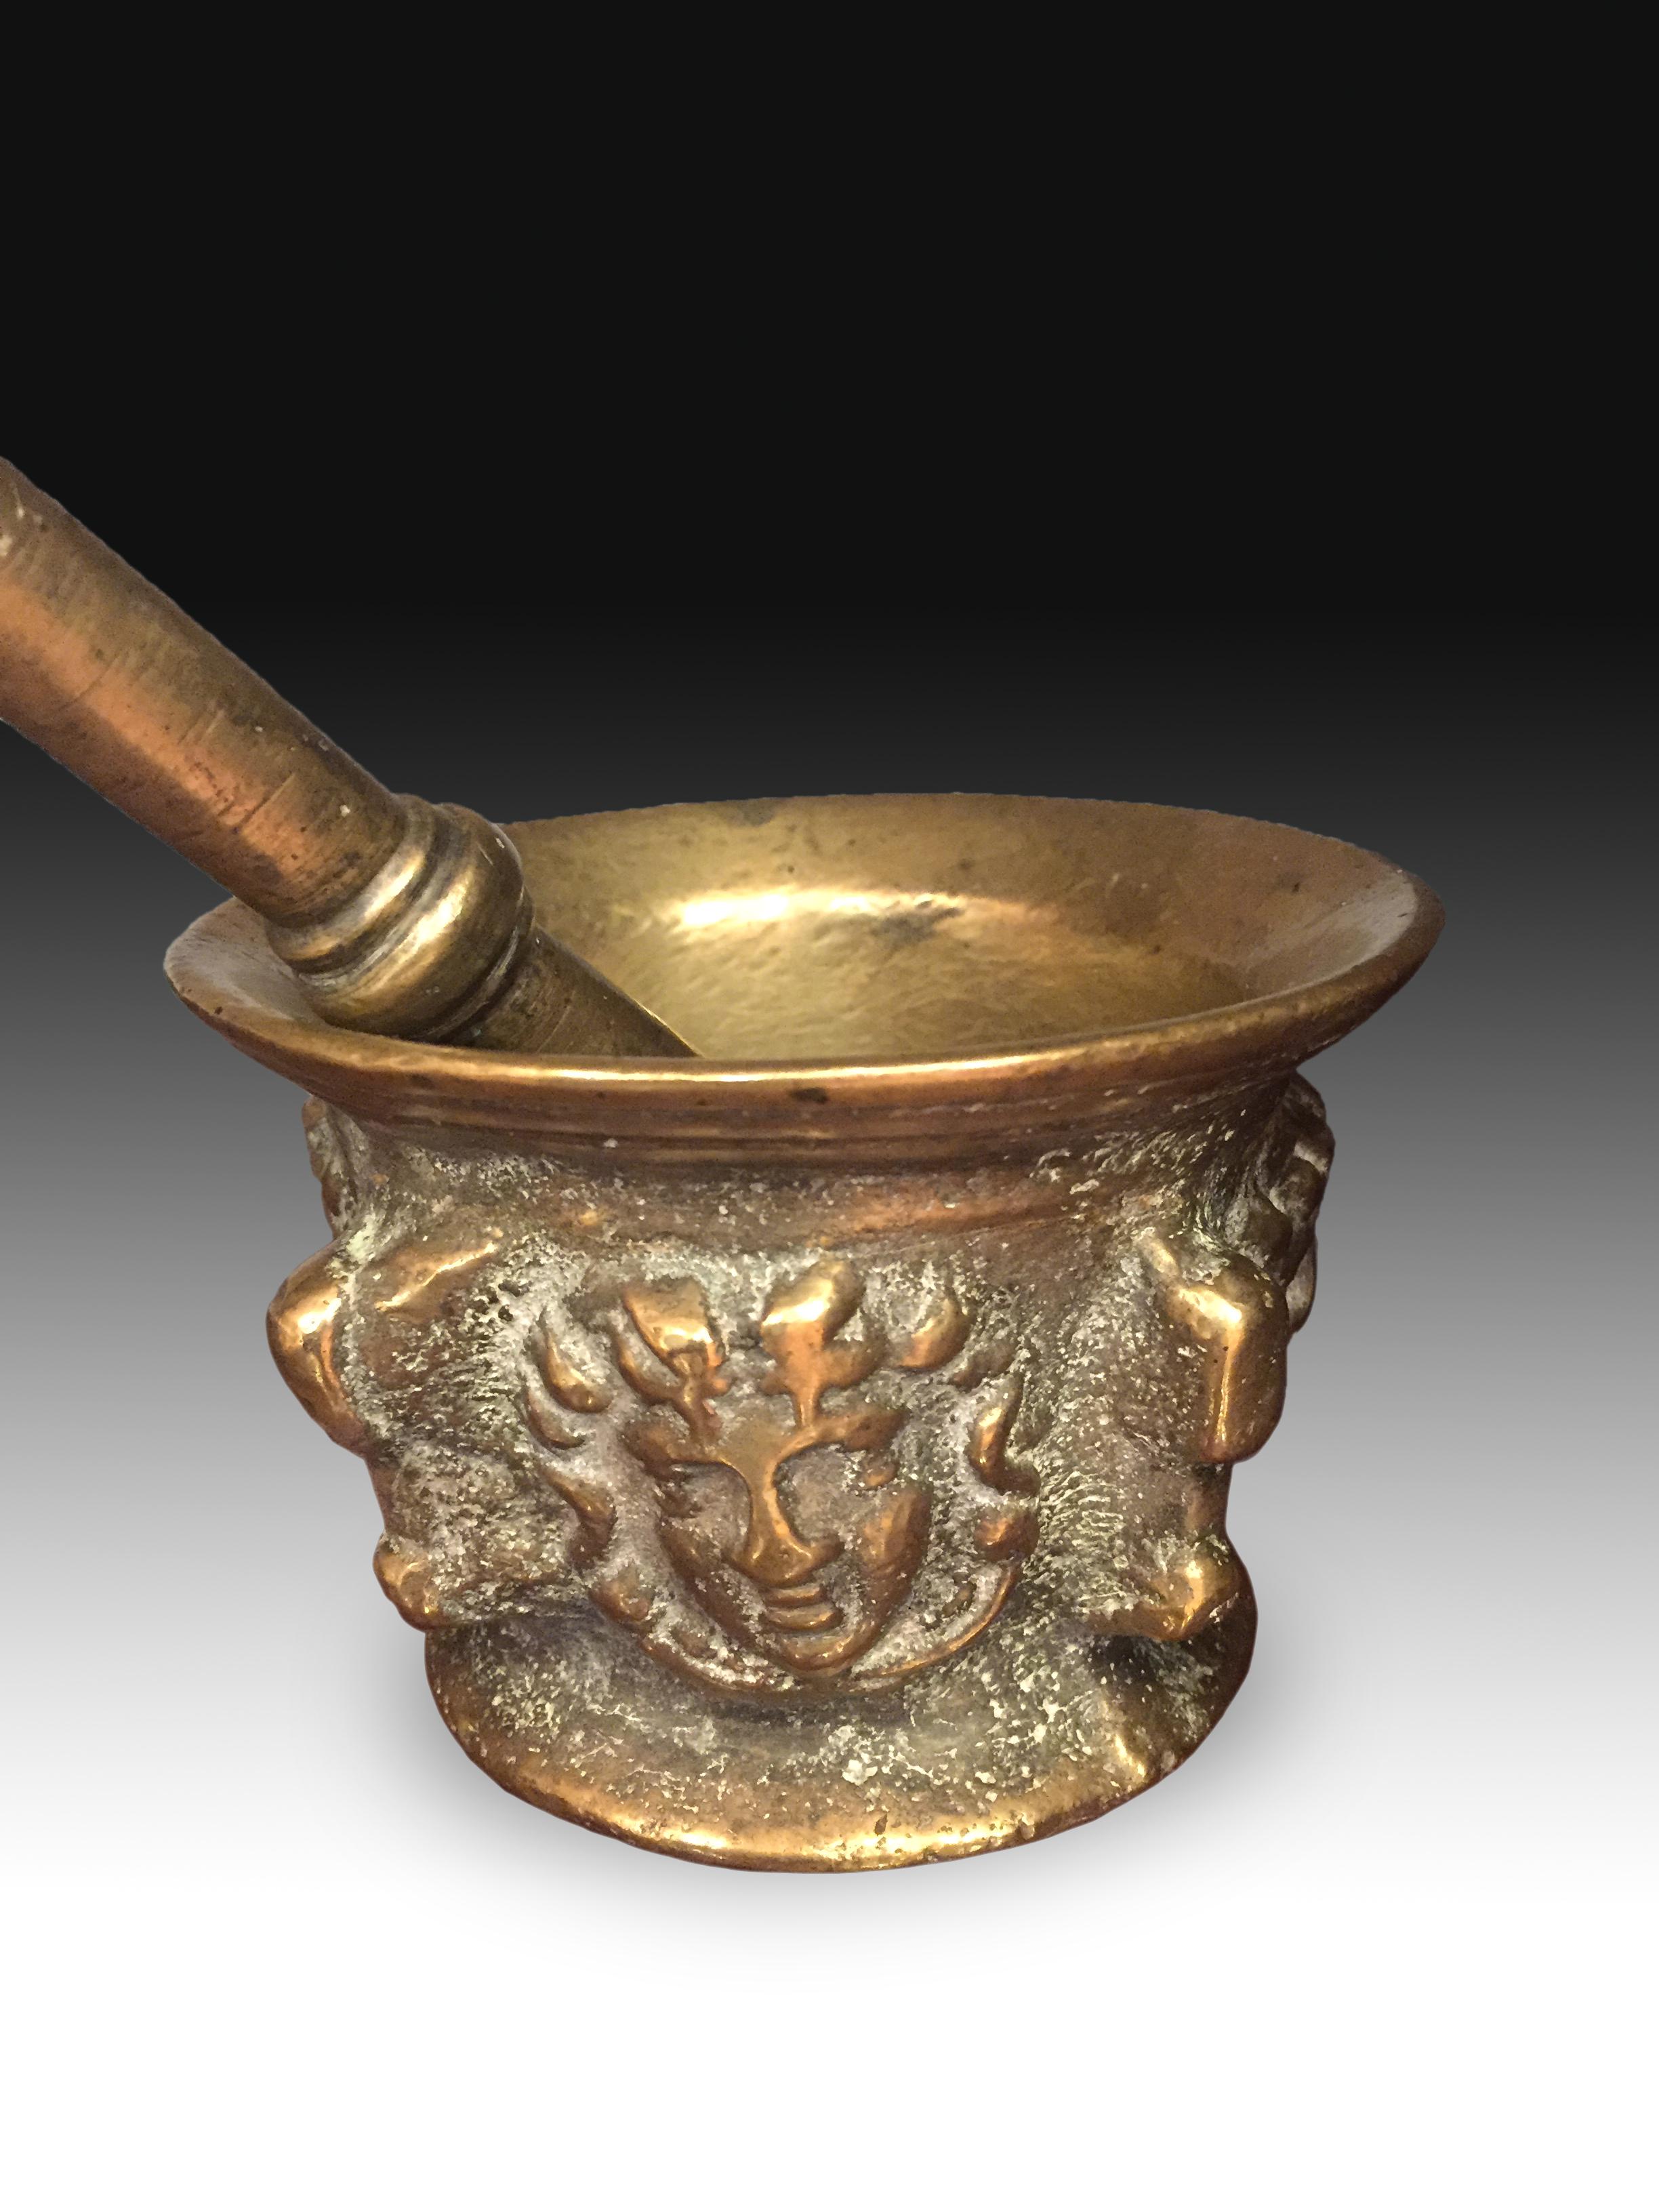 Bronze mortar, 17th century.
Mortar with a cylindrical body with an open mouth towards the outside and a prominent lower molding that presents a decoration based on ribs with relief masks. This type of works were created for use in pharmacies or in